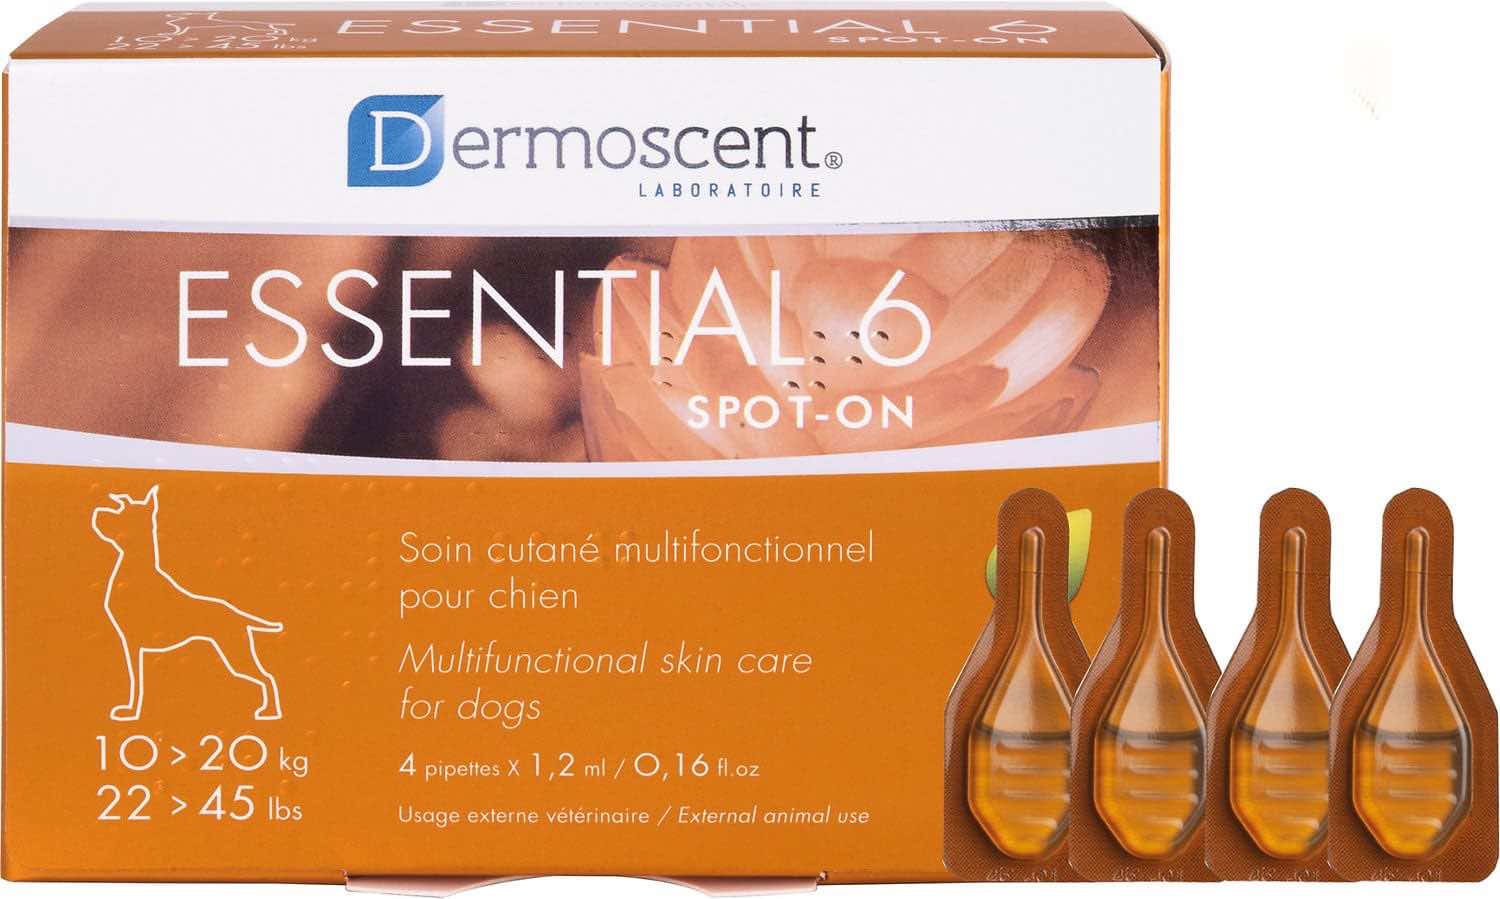 Essential 6 Spot-On for Dogs 22-45 lbs 4 x 0.16 oz (1.2 ml) pipettes 1